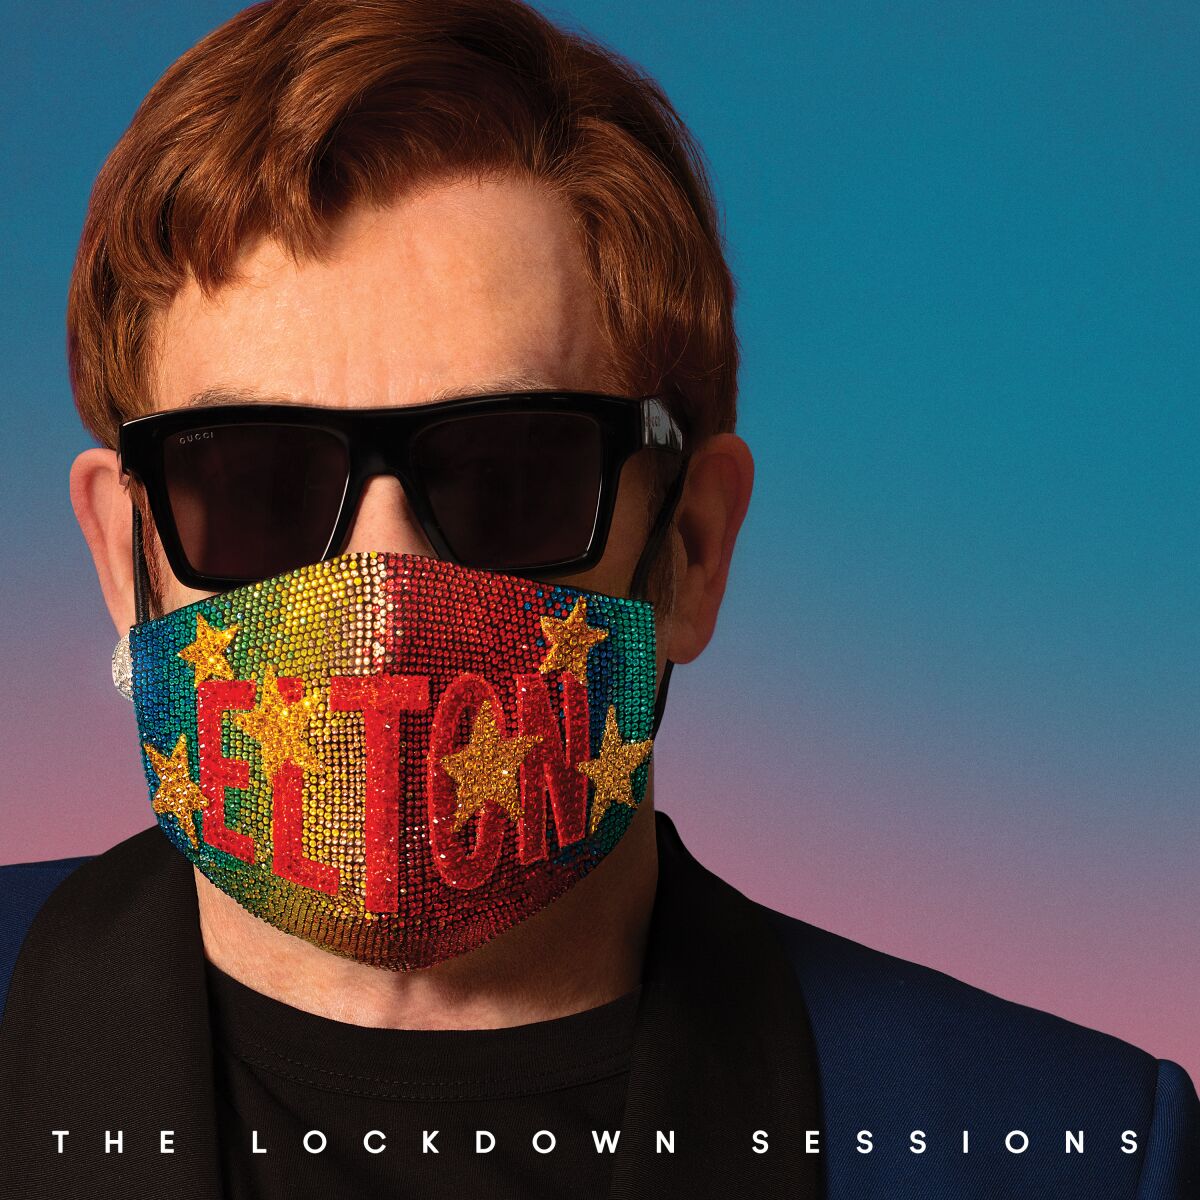 This cover image released by Interscope Records shows "The Lockdown Sessions" by Elton John. (Interscope Records via AP)